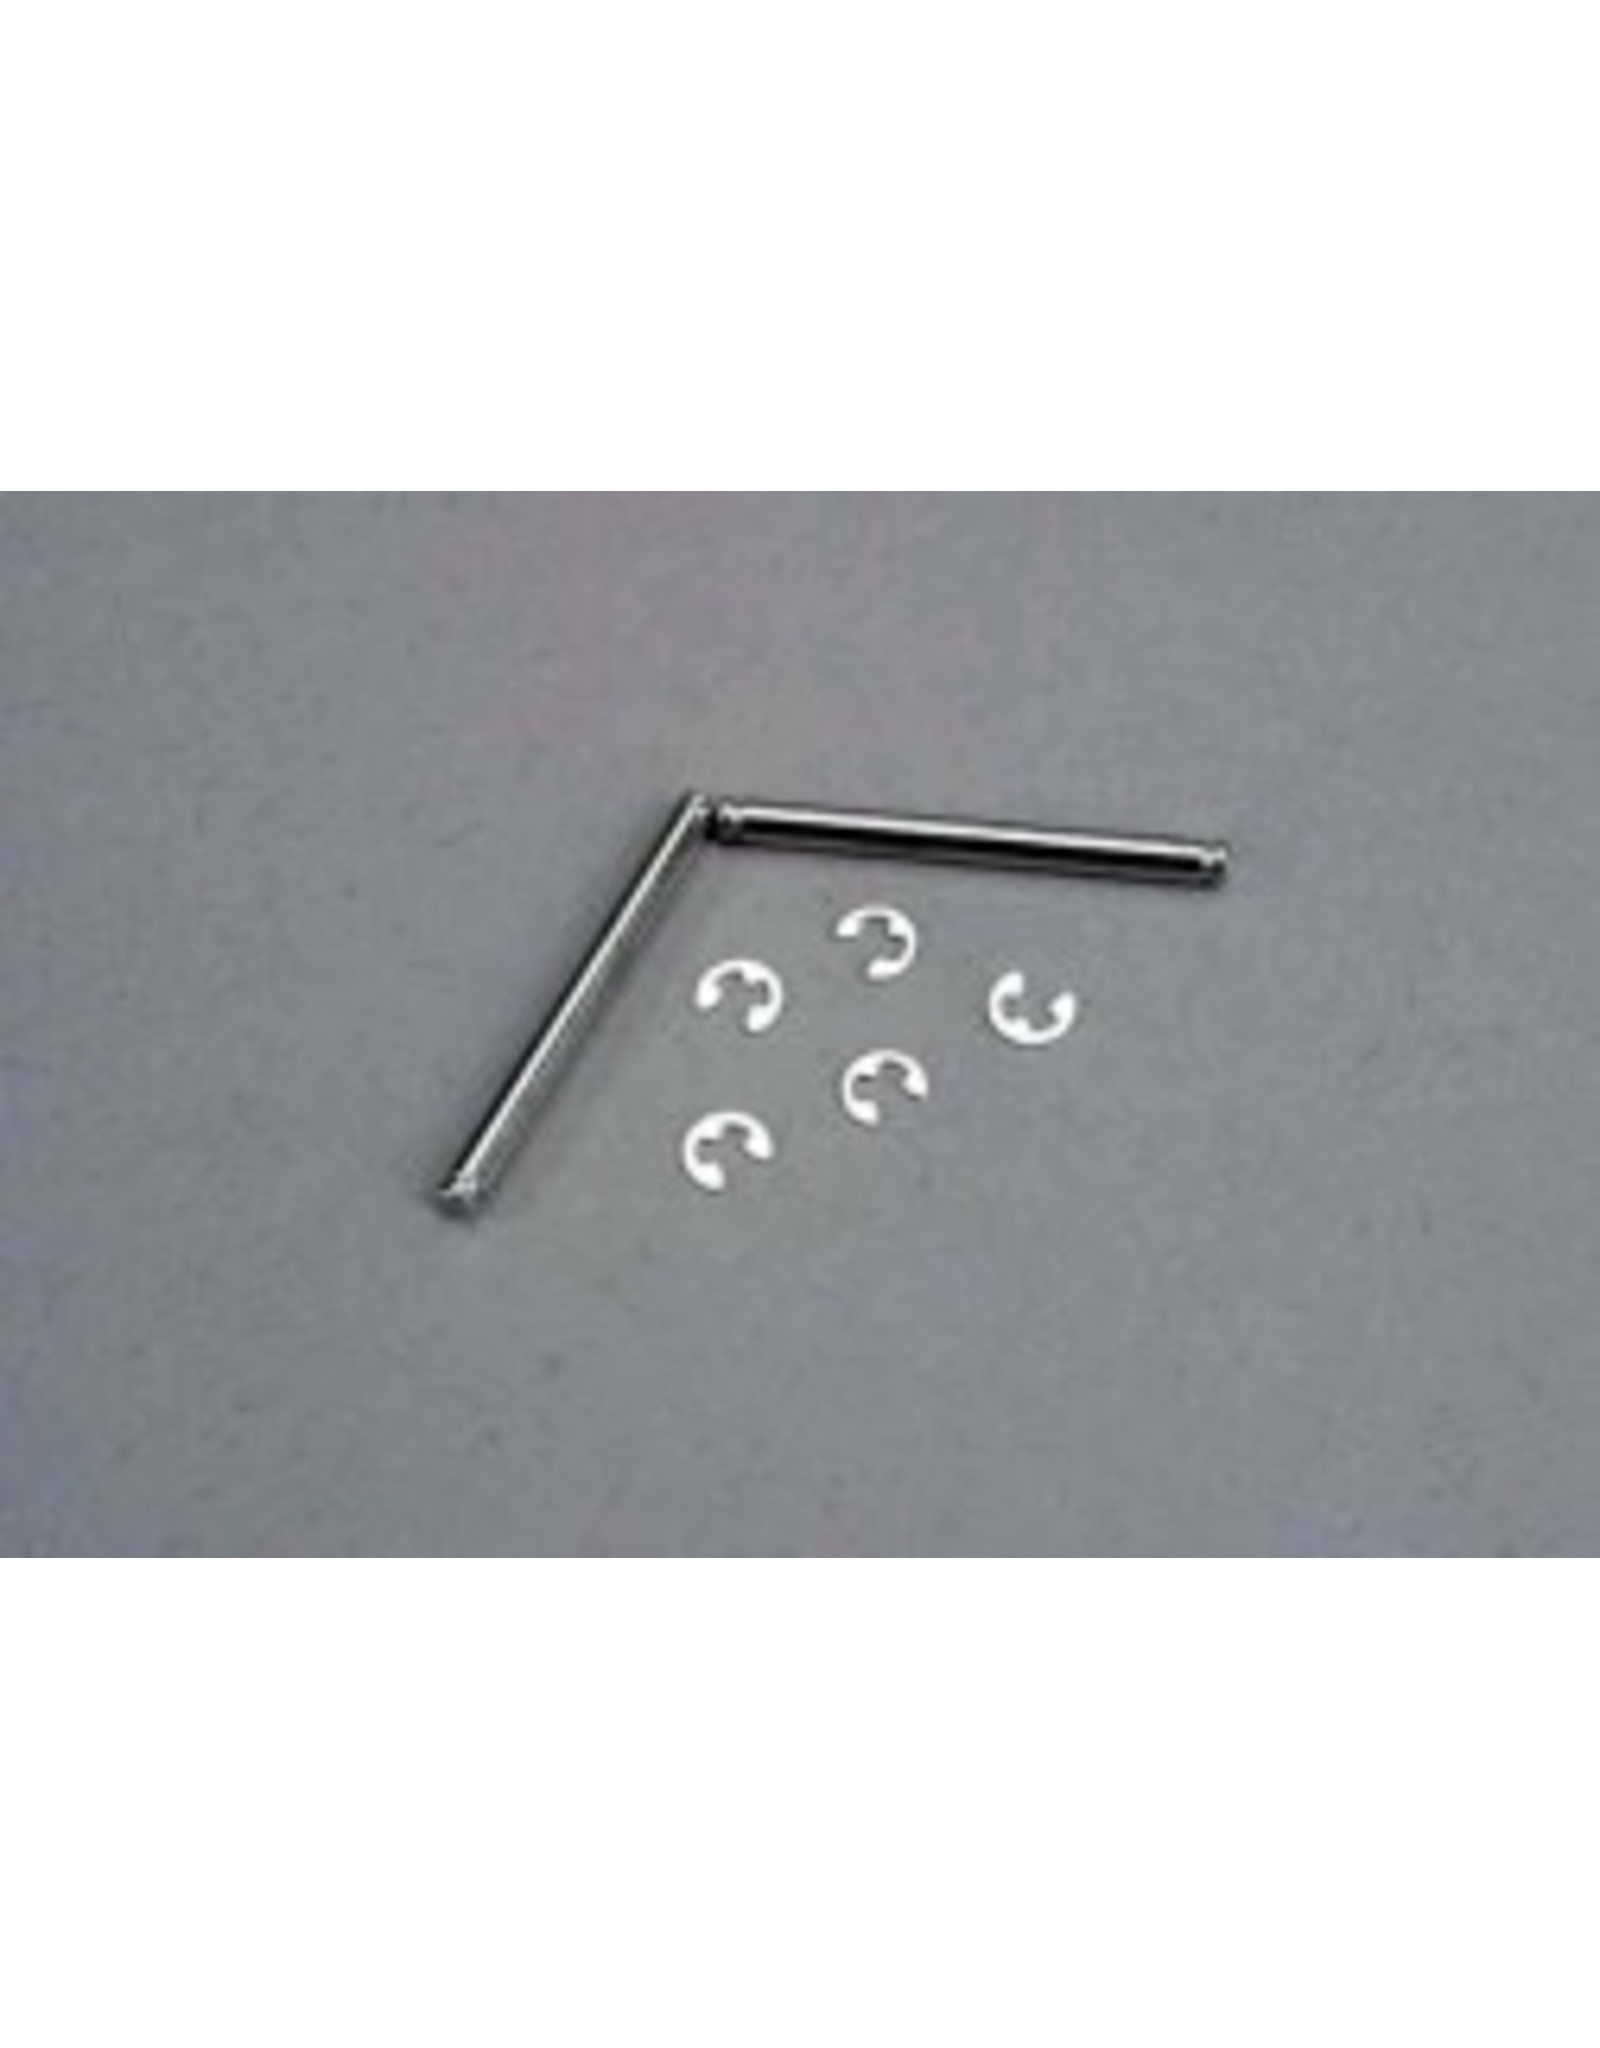 Traxxas [Suspension pins, 2.5x29mm (king pins) w/ e-clips (2) (strengthens caster blocks)] Suspension pins, 2.5x29mm (king pins) w/ e-clips (2) (strengthens caster blocks)